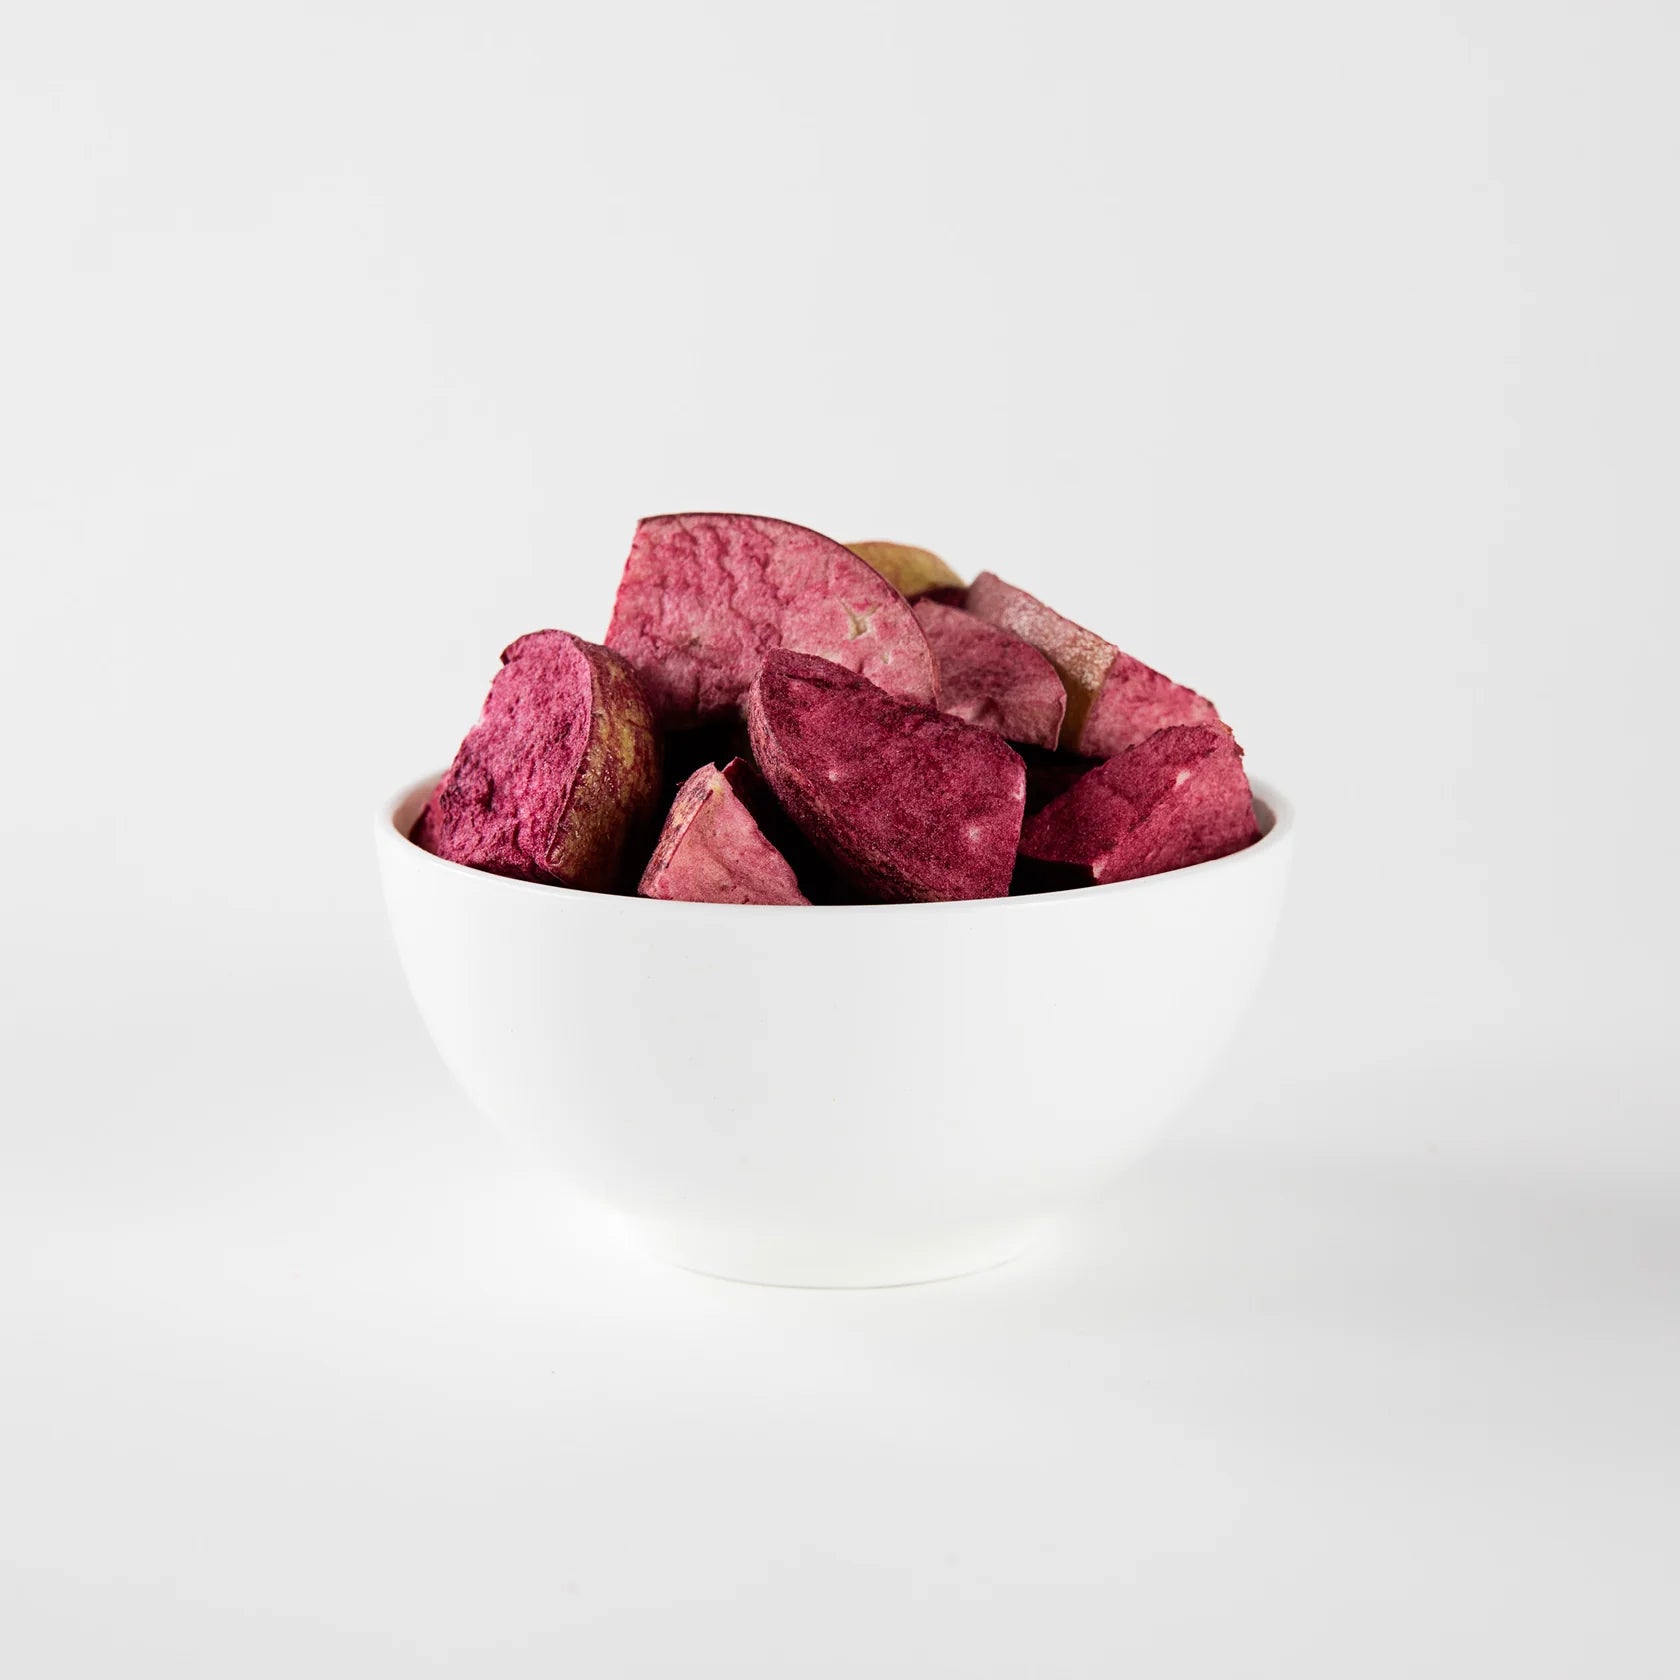 Freeze Dried Apple Wedges infused with Blackcurrant